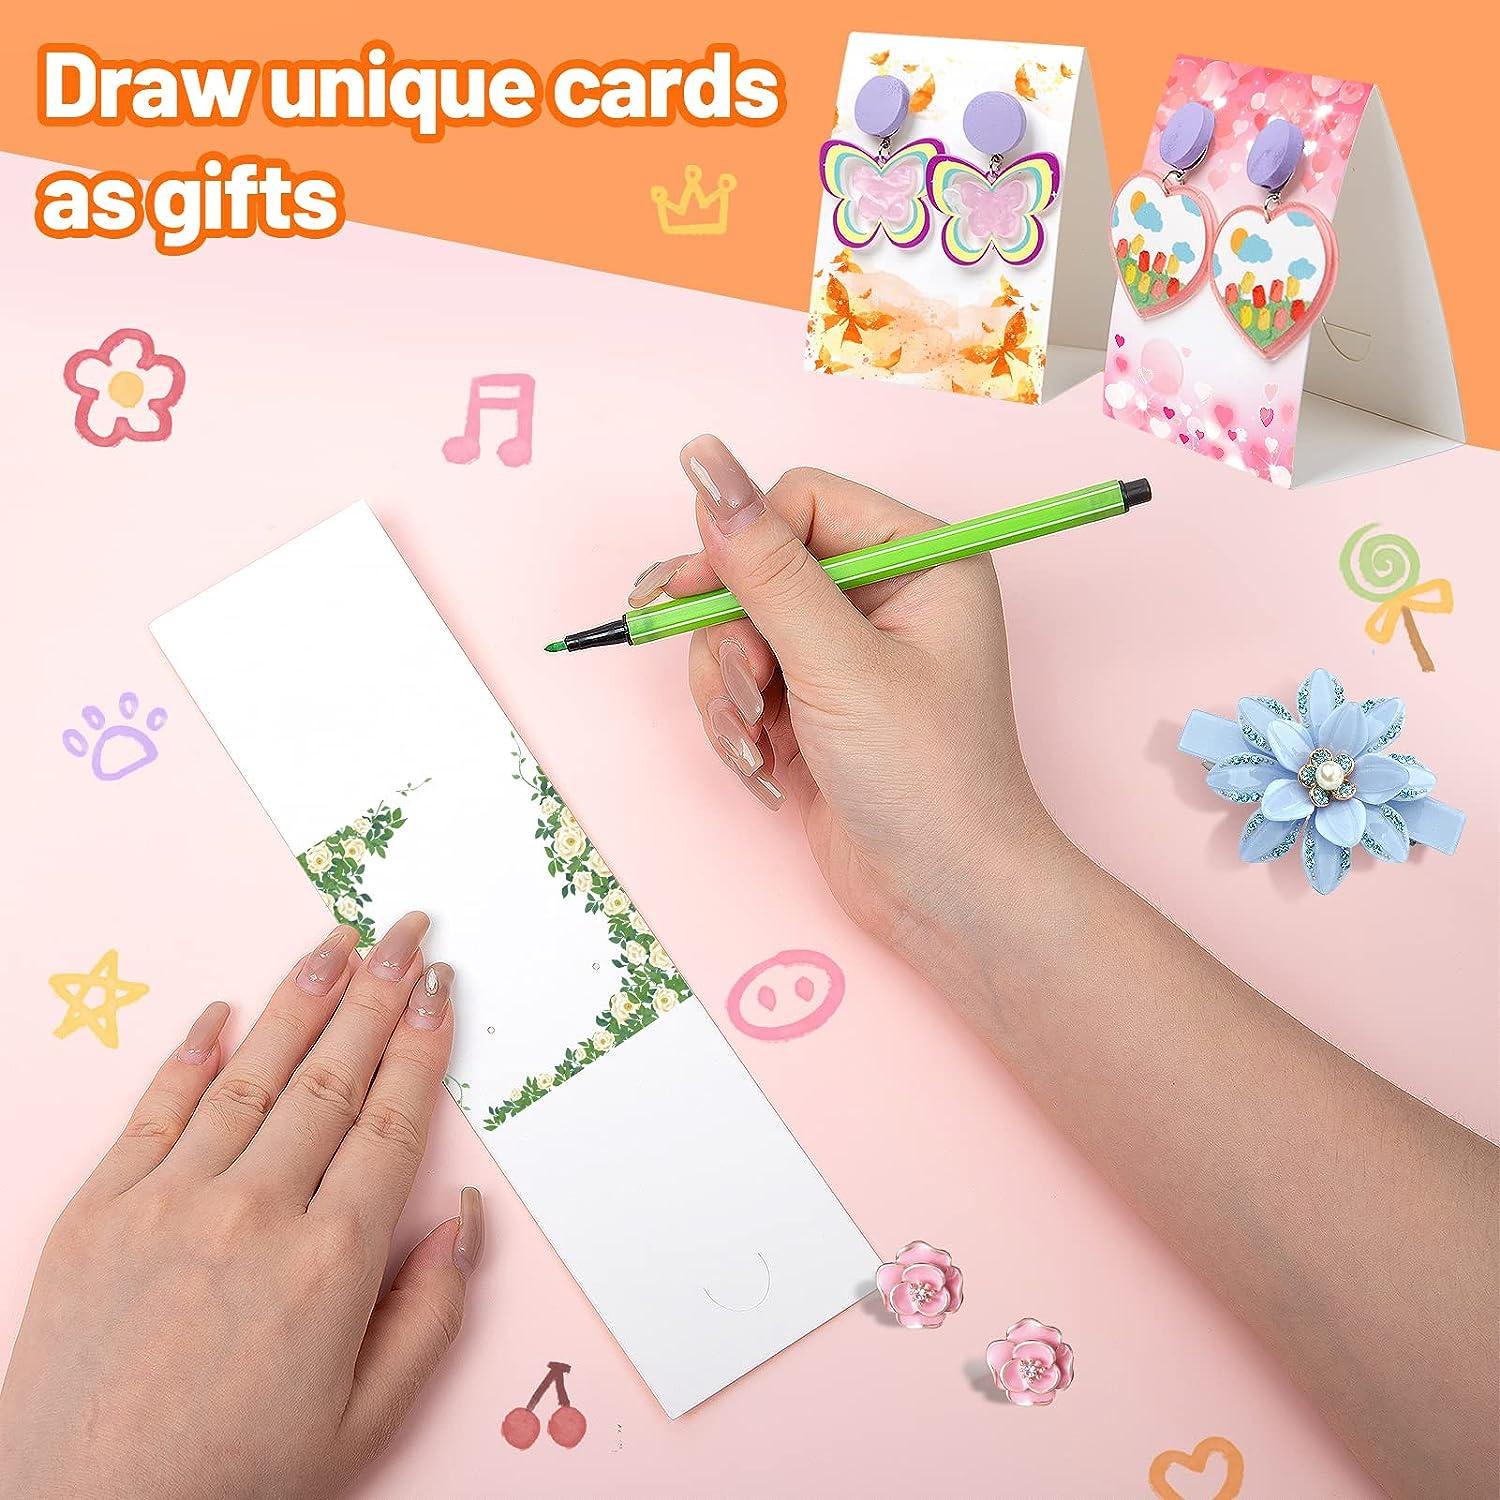 100 Pcs Standing Earring Display Cards- Earring Holder Cards for